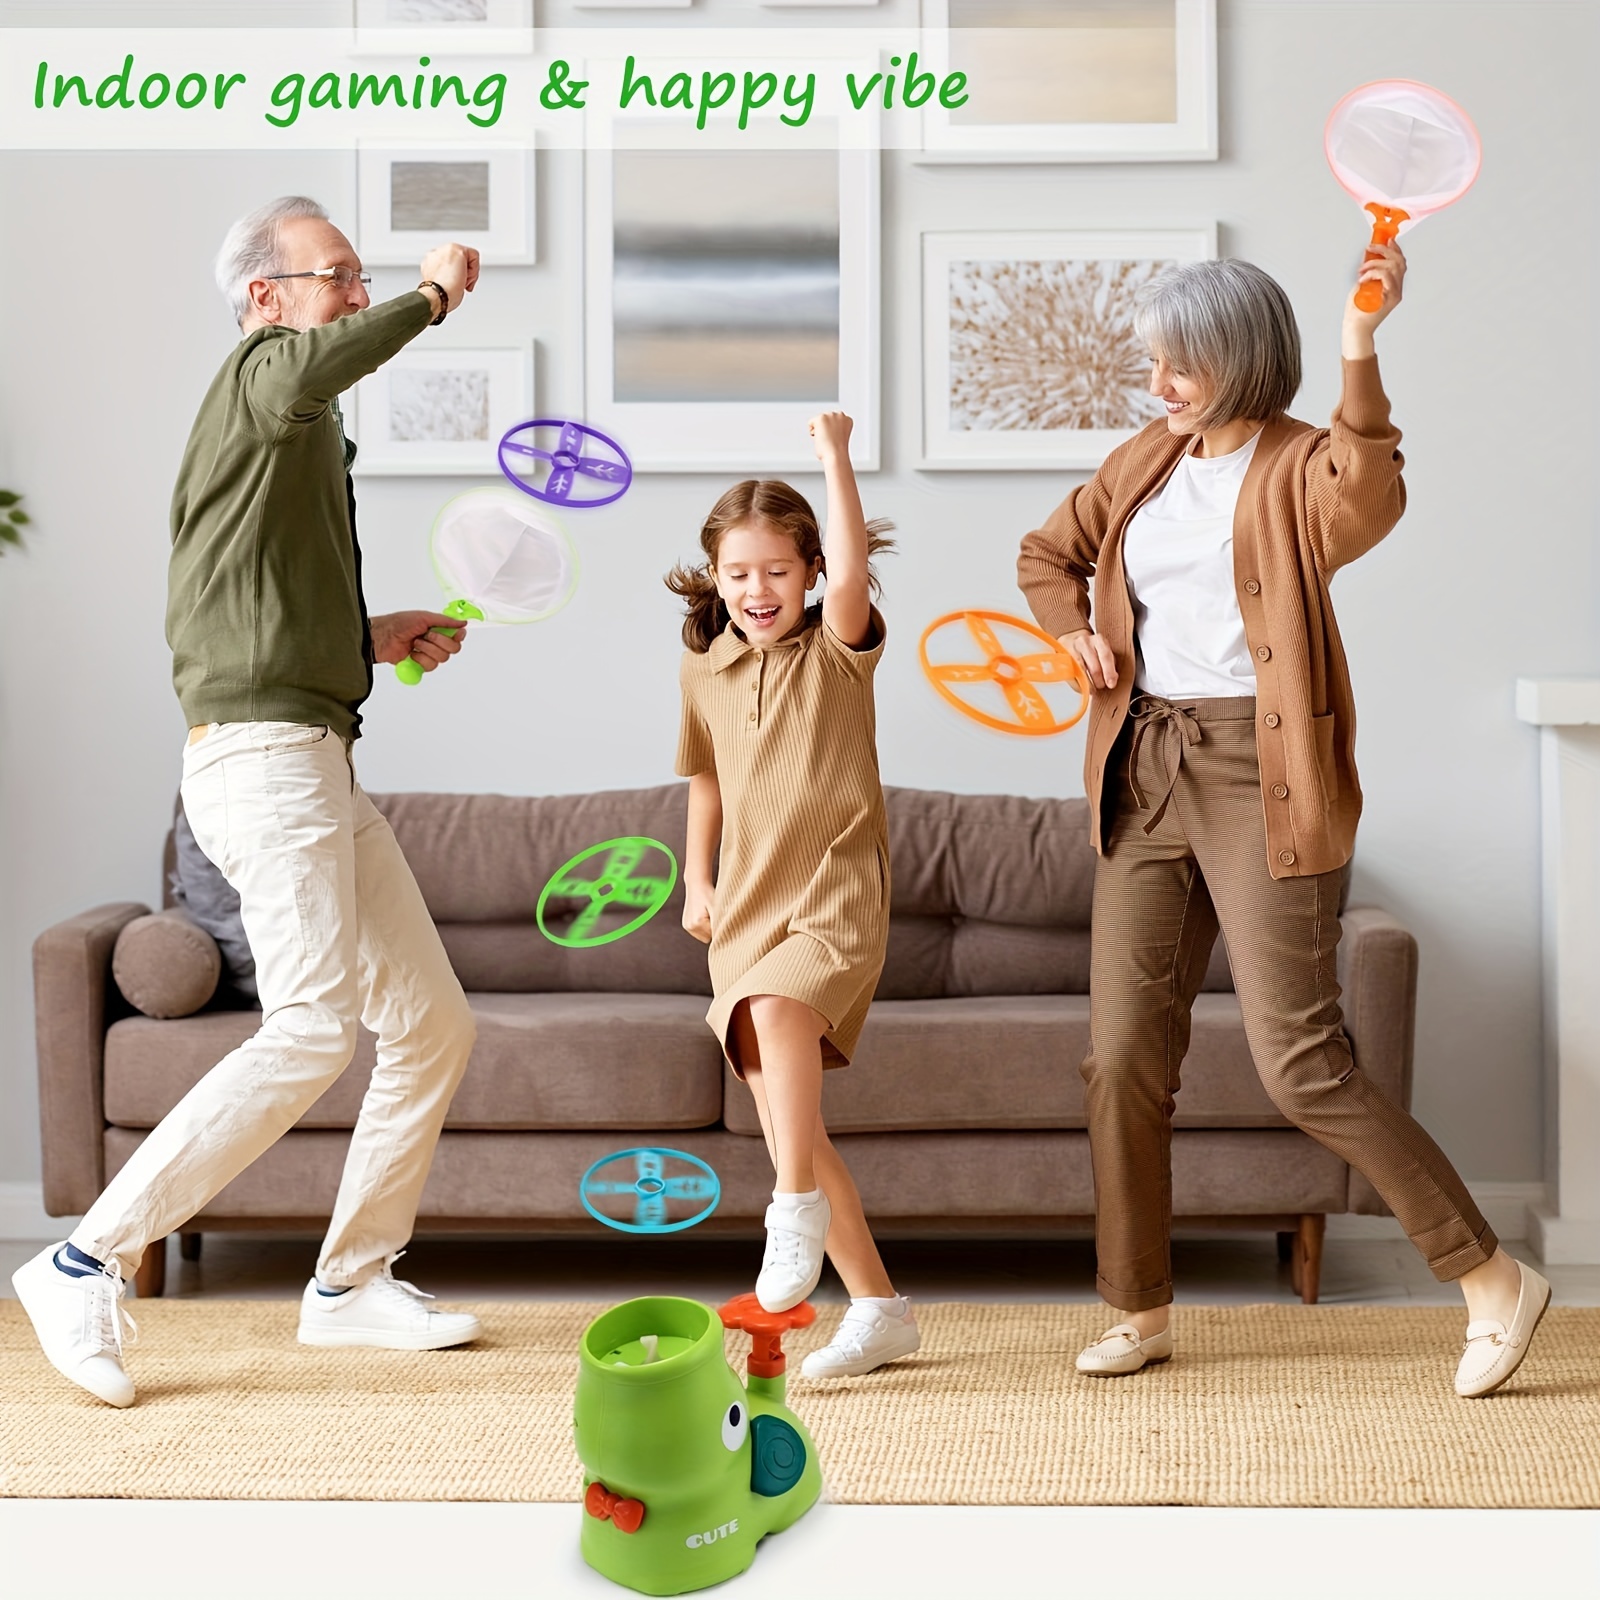 8 Best Fun Chasing Games for Young Kids